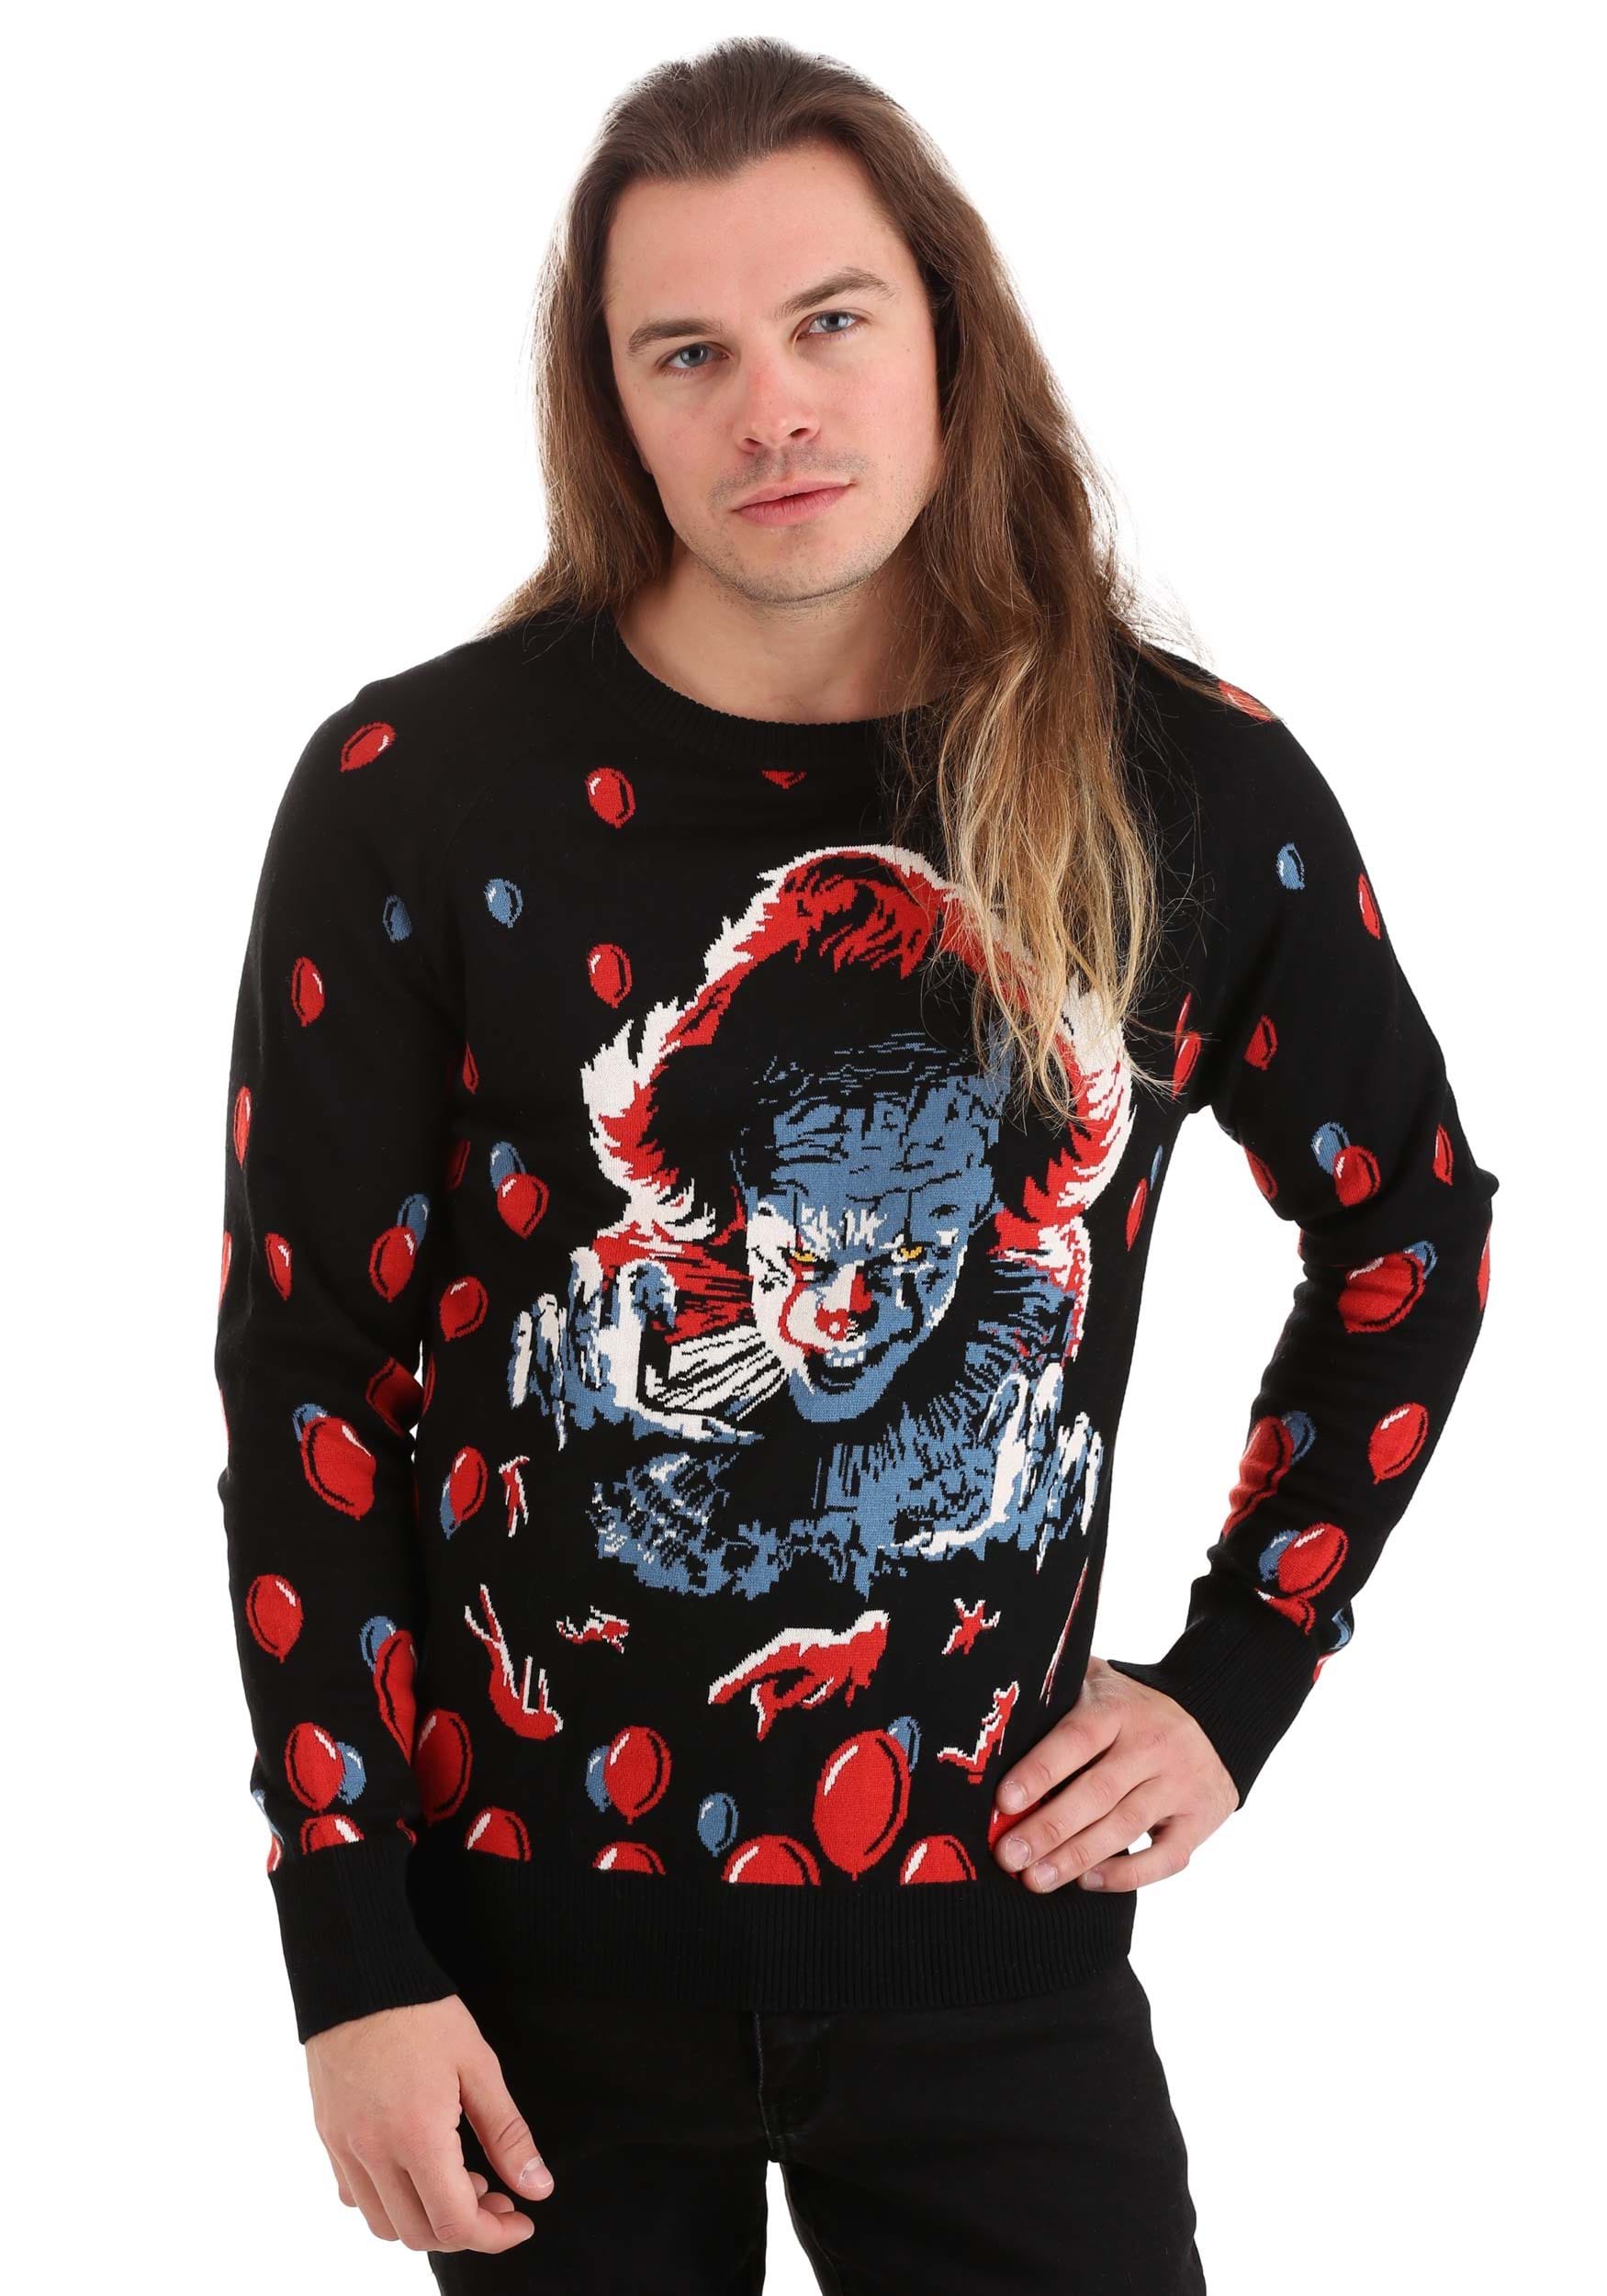 Photos - Fancy Dress IT Luggage FUN Wear Adult IT  Pennywise Halloween Sweater Black/Red/Whi (2019)